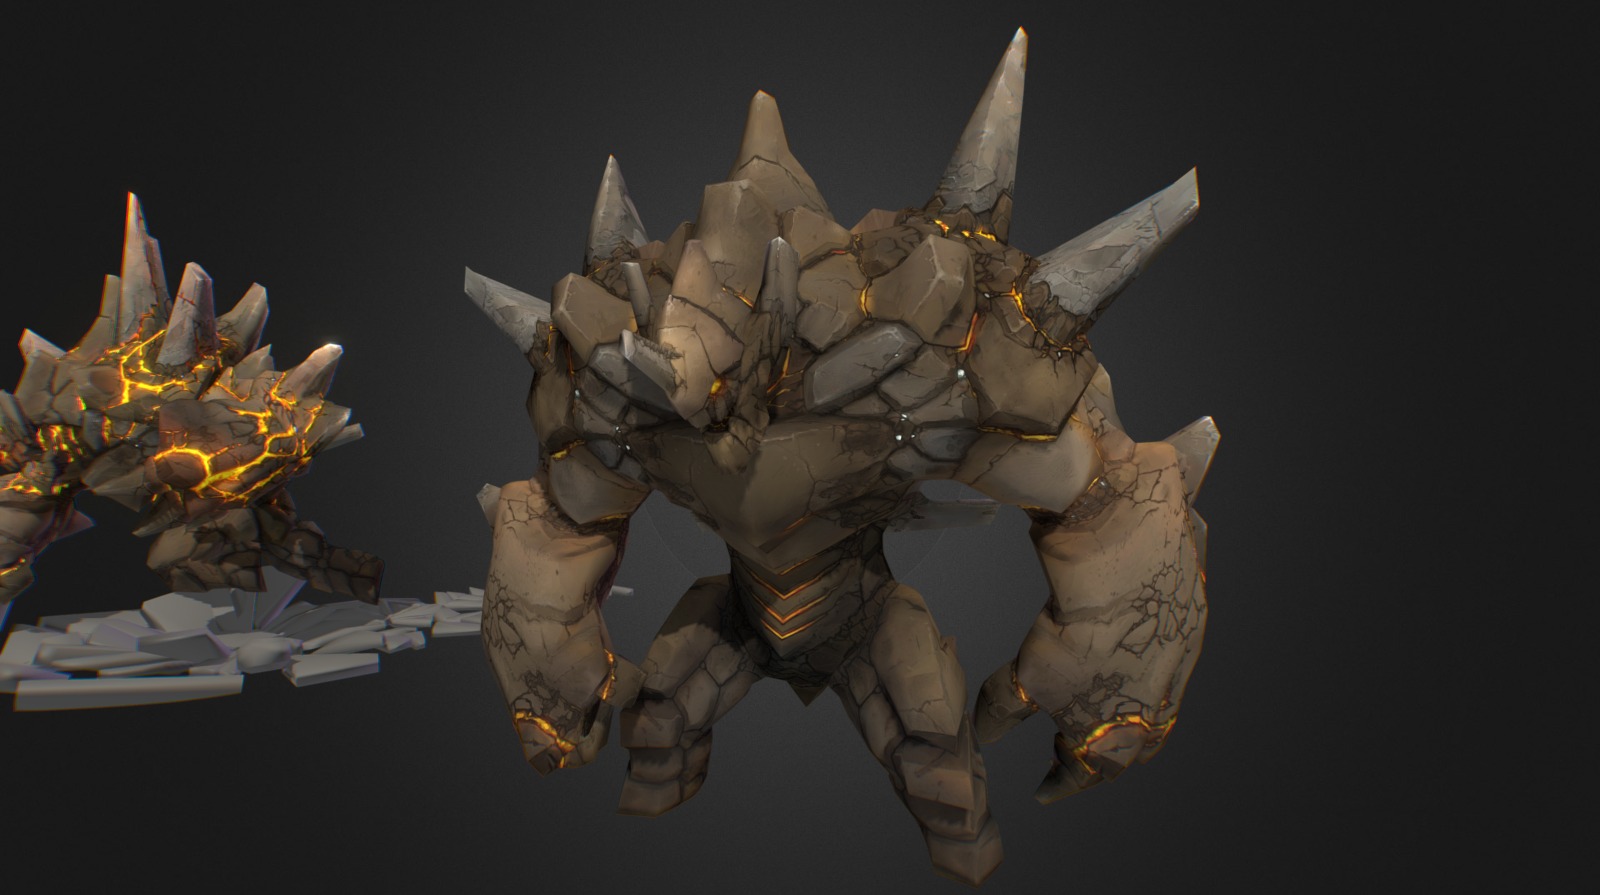 My visual update take of Malphite from League of Legends.
this is part of my entry for the Riot Games - Polycount contest
Check out my entry post in here:
http://www.polycount.com/forum/showthread.php?t=143736 - Malphite Action Set - 3D model by Trik 3d model